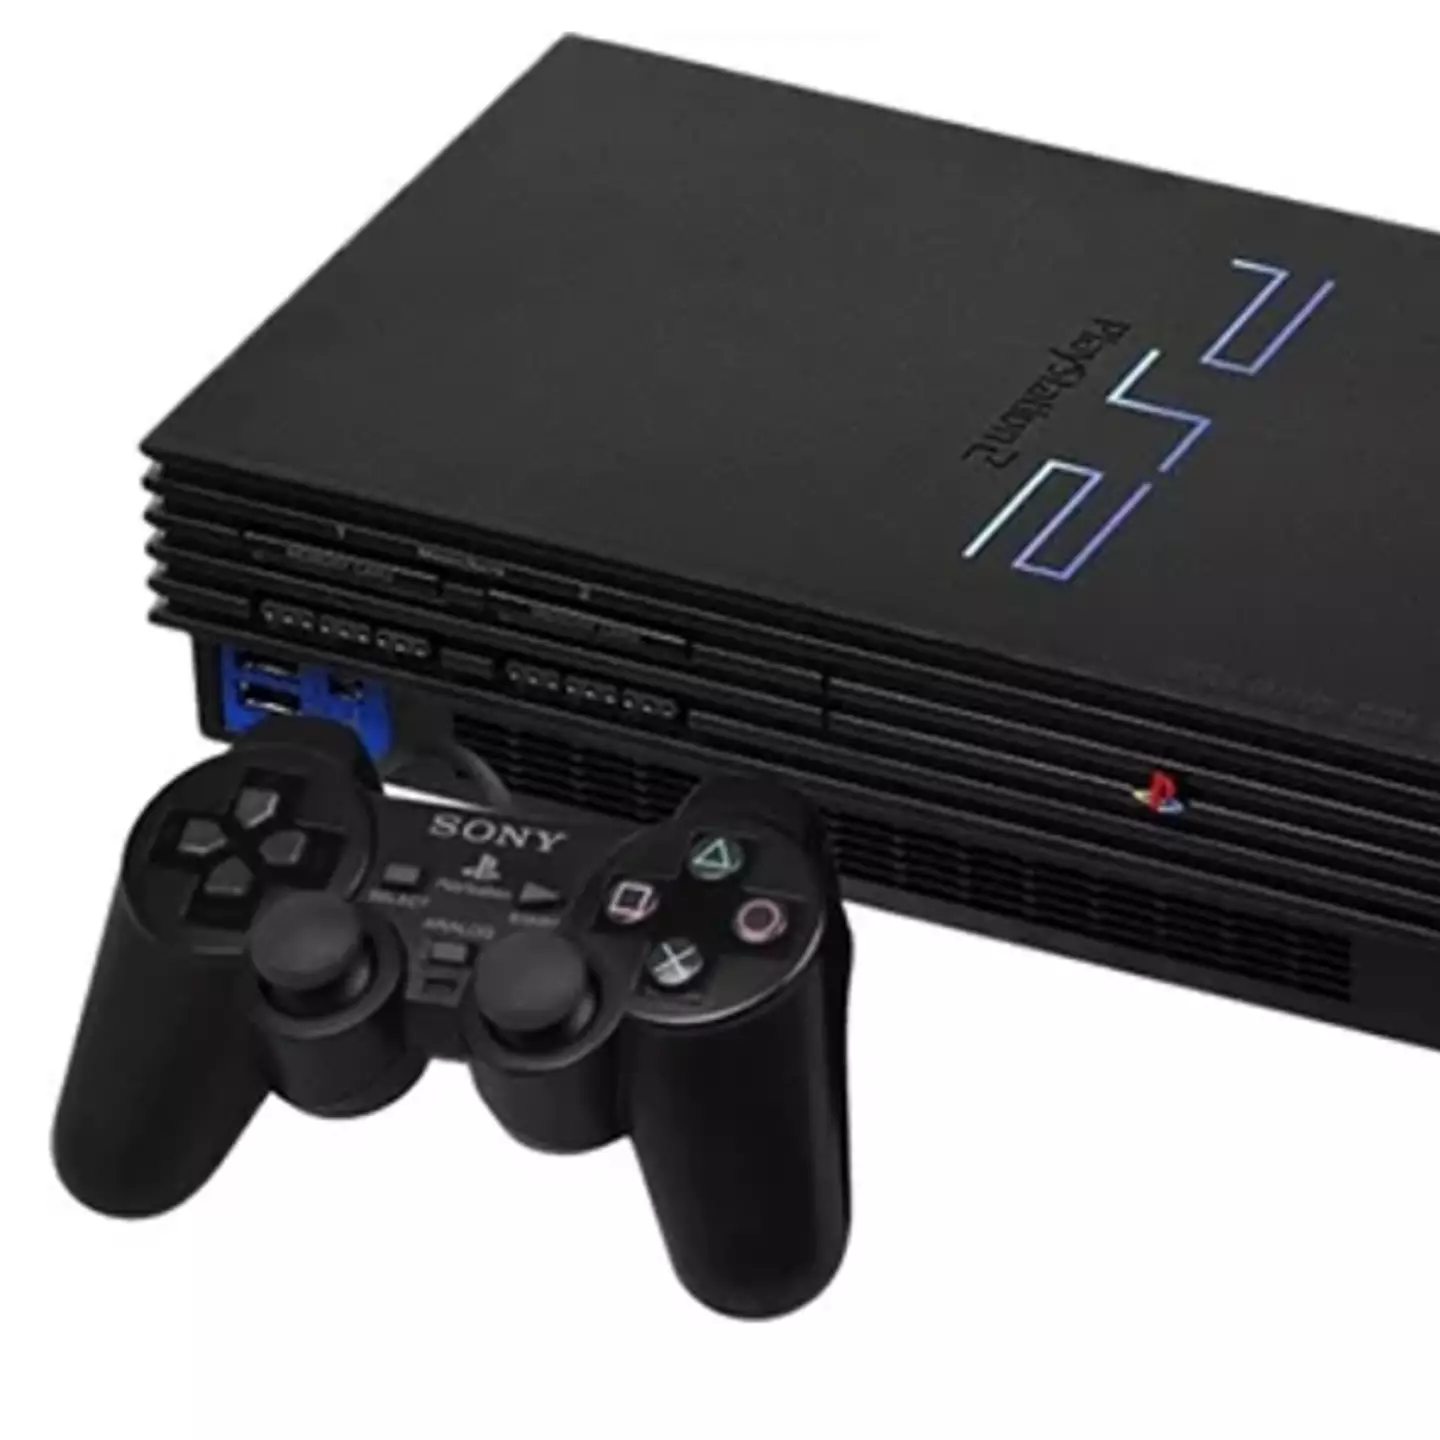 Shocking PlayStation 2 Scandal: How A Game Crossed The Line Into Illegality